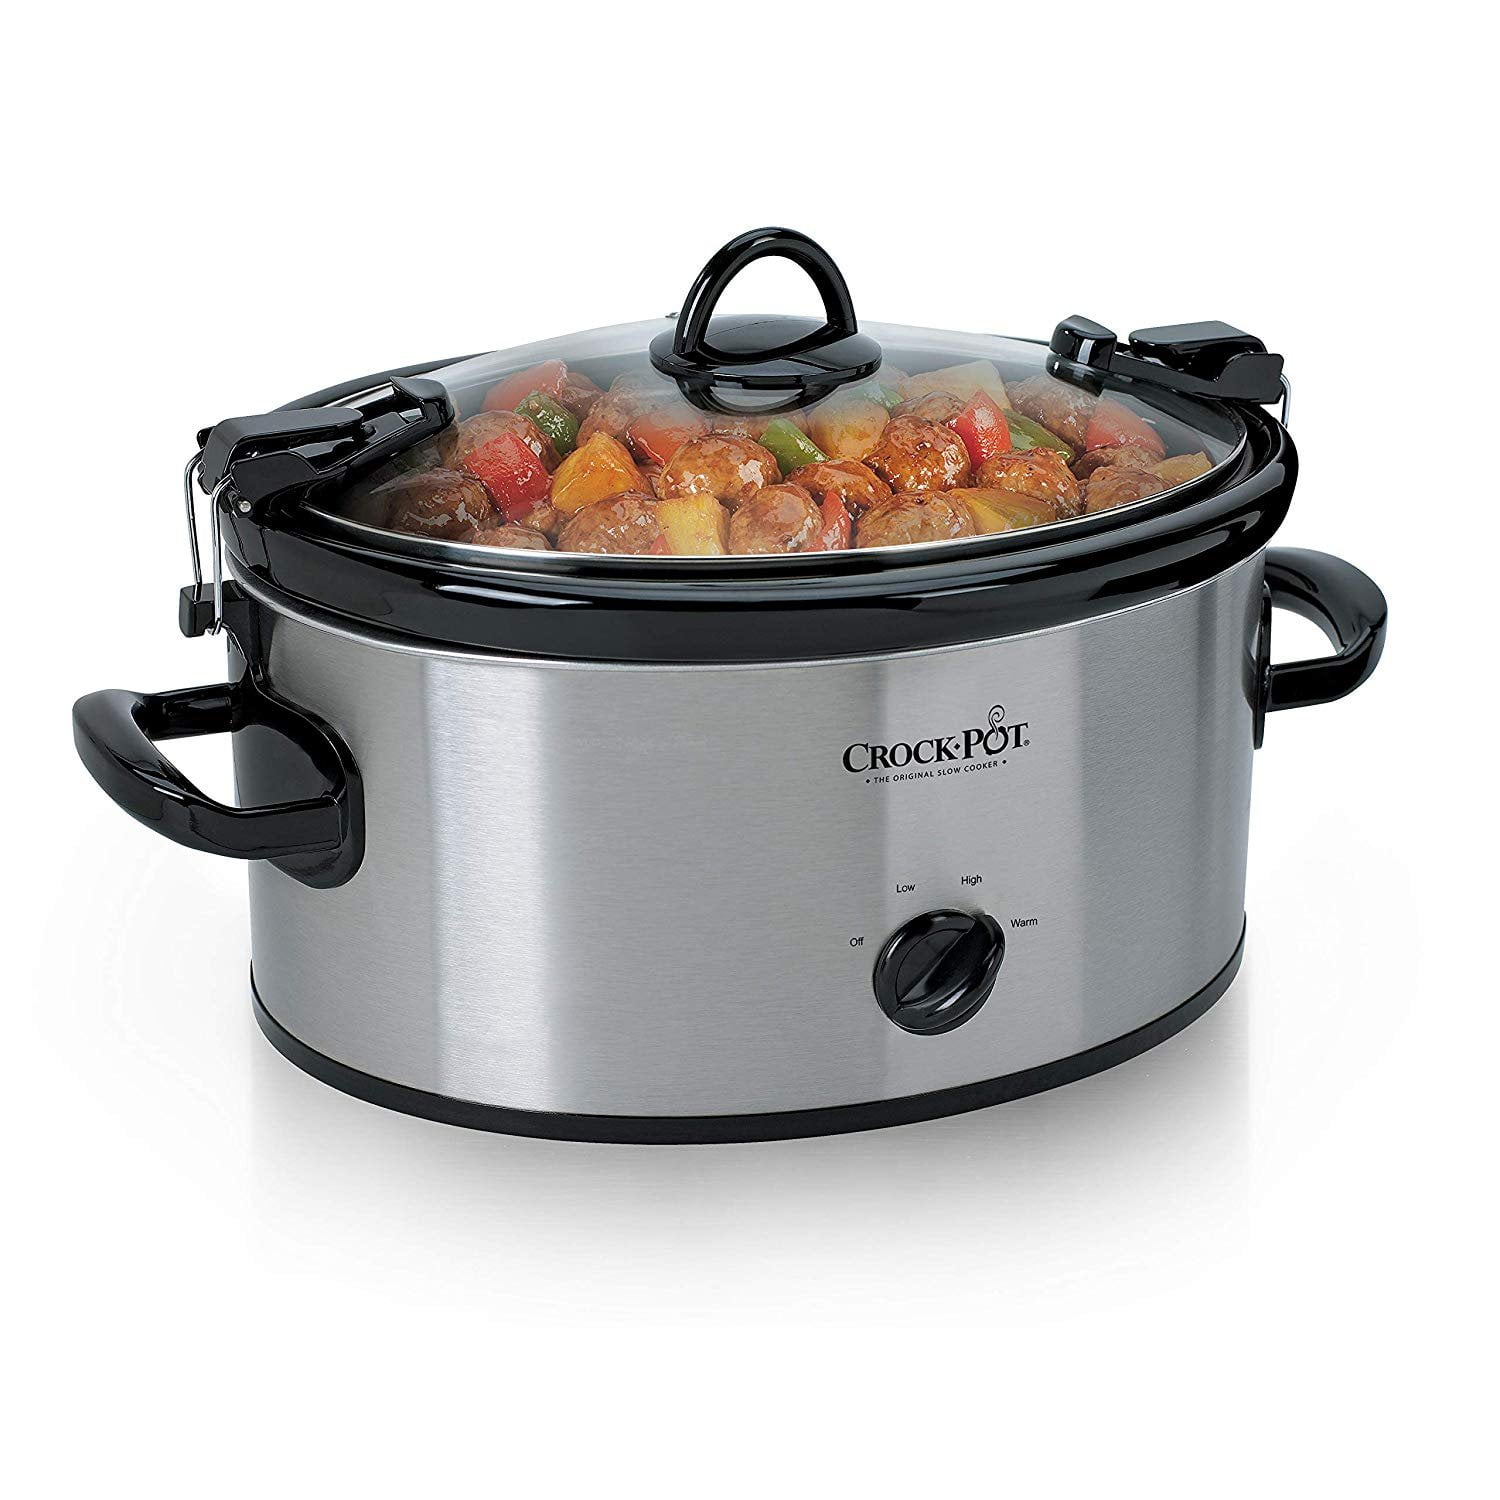 Crock-Pot Cook & Carry 6-Quart Oval Portable Manual Slow Cooker  Stainless  Steel (SCCPVL600S) for Sale in Pompano Beach, FL - OfferUp